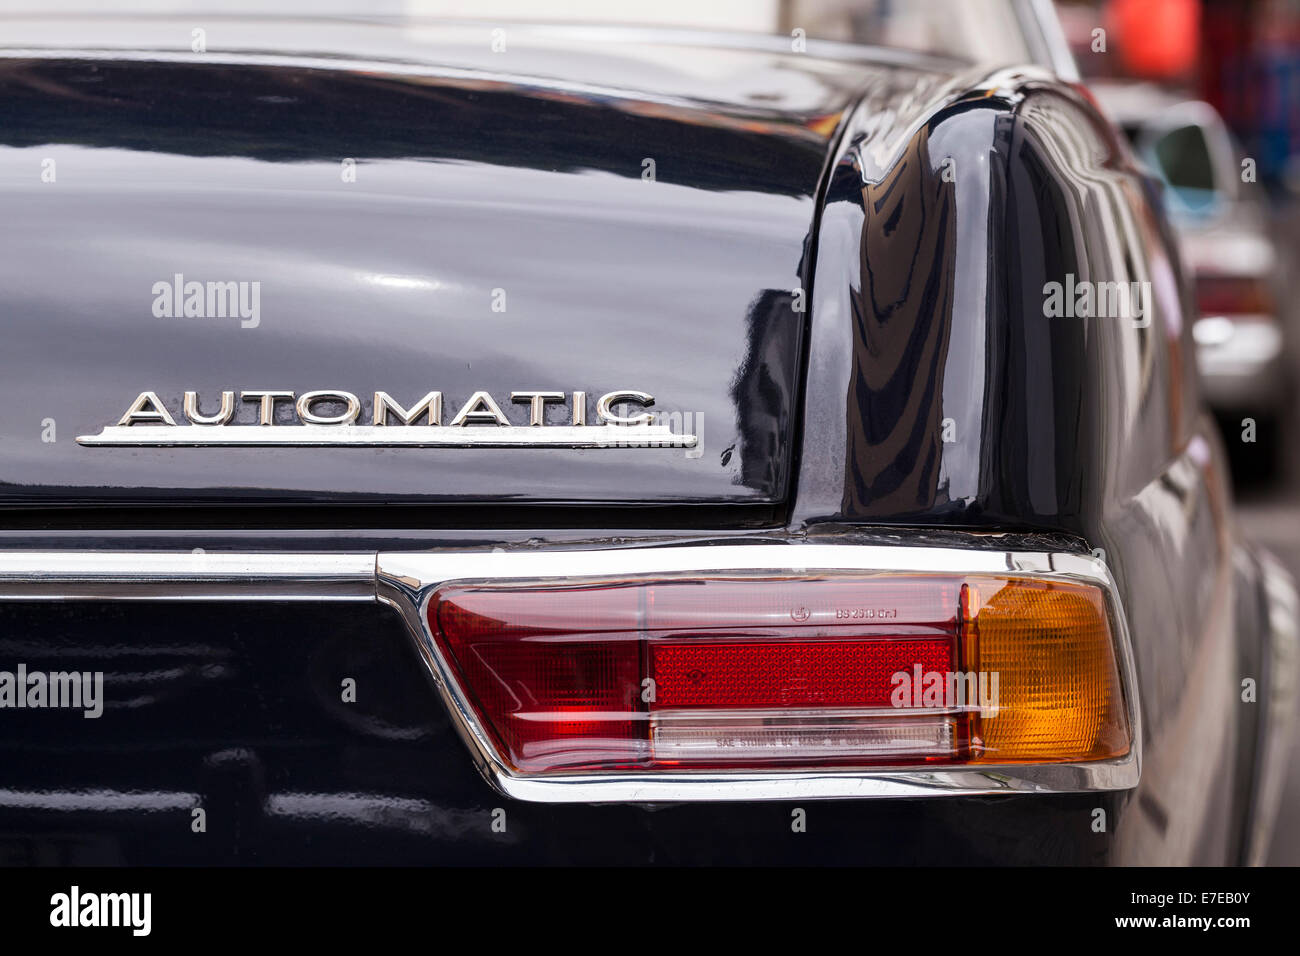 Detail of Automatic badge and rear lights on a vintage Mercedes Benz in Guia de Isora, Tenerife, Canary Islands, Spain. Stock Photo